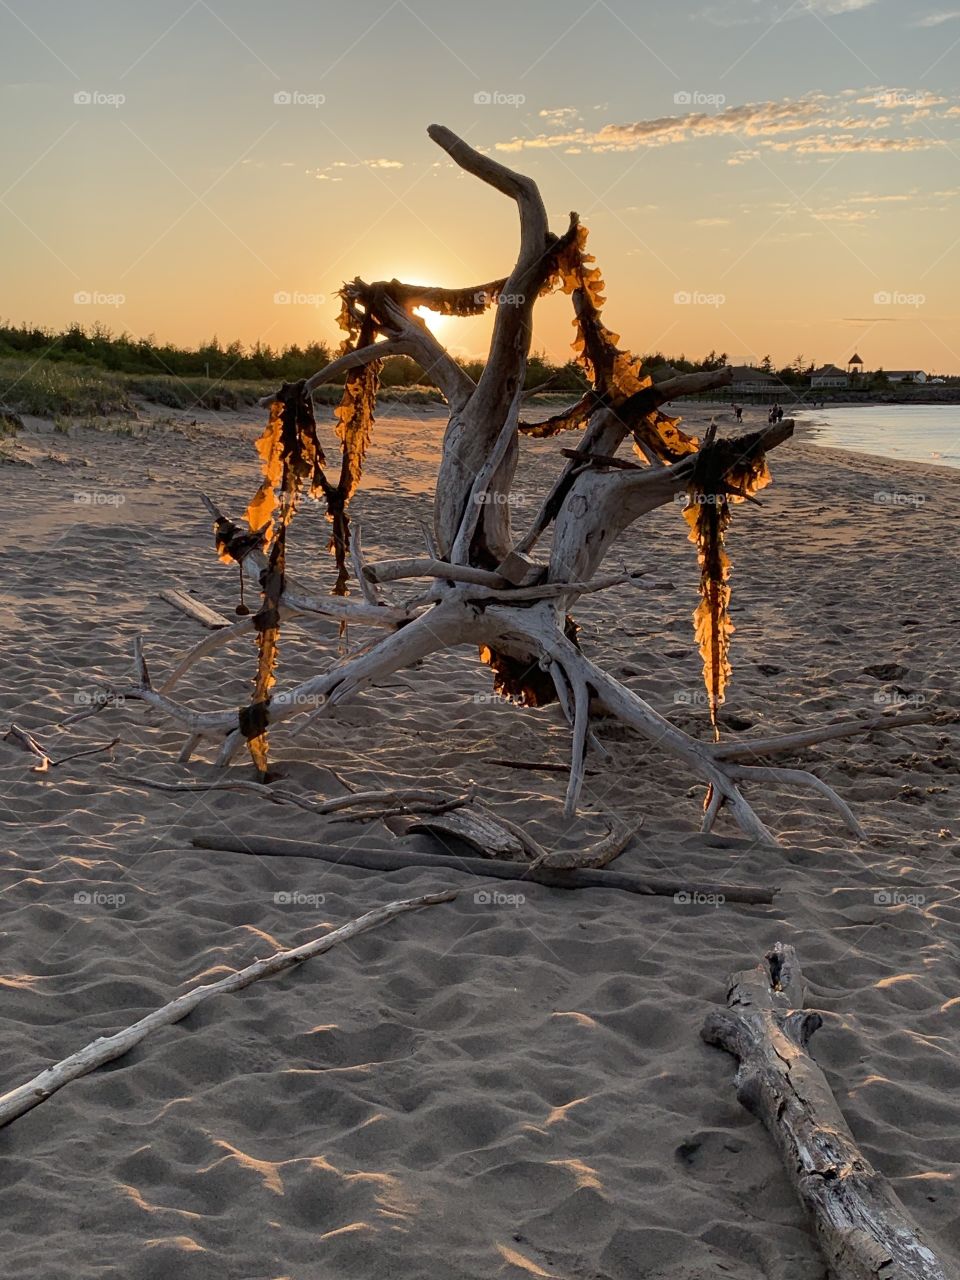 Found this large log washed up on the shore wrapped in seaweed at the Dunes in Bouctouche. New Brunswick has so many beautiful places to see. This is just one example of a summer night in this magnificent province.